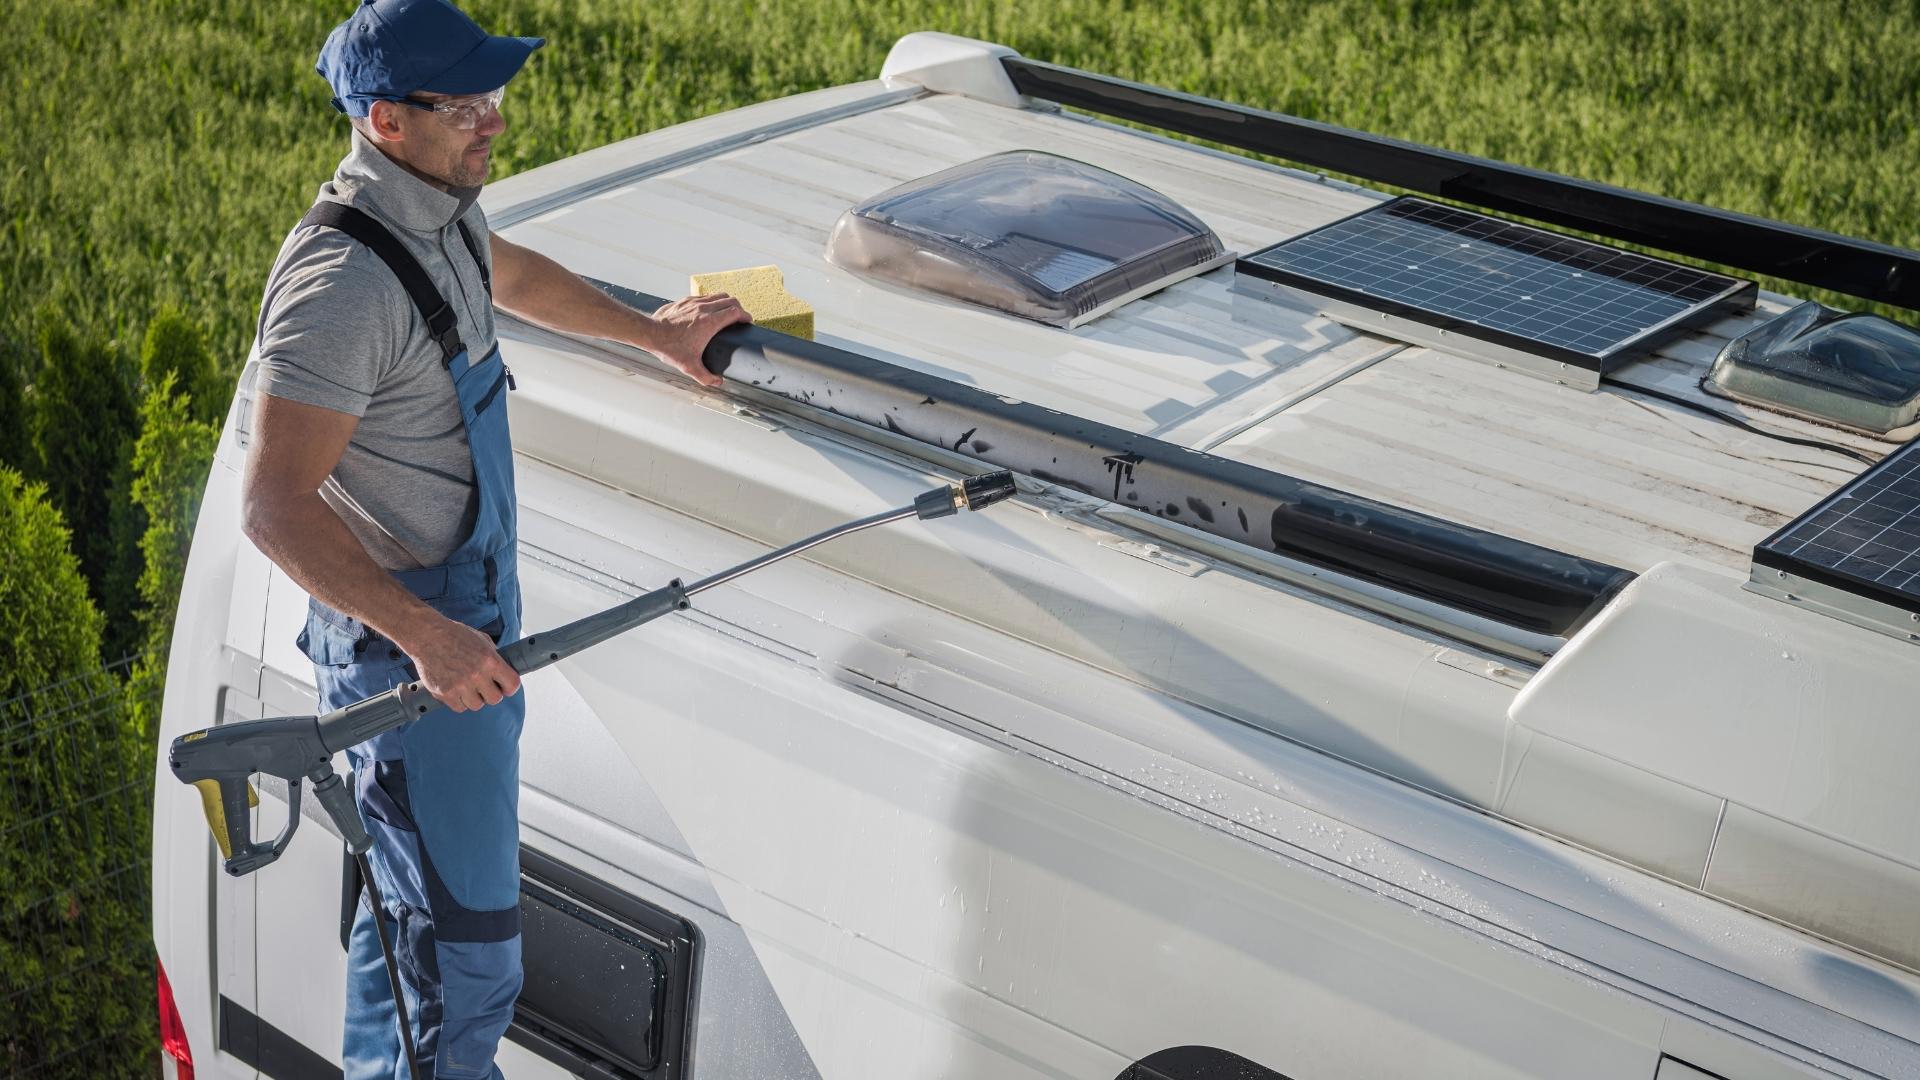 Keeping your RV roof clean can eliminate the need for an RV black streak remover